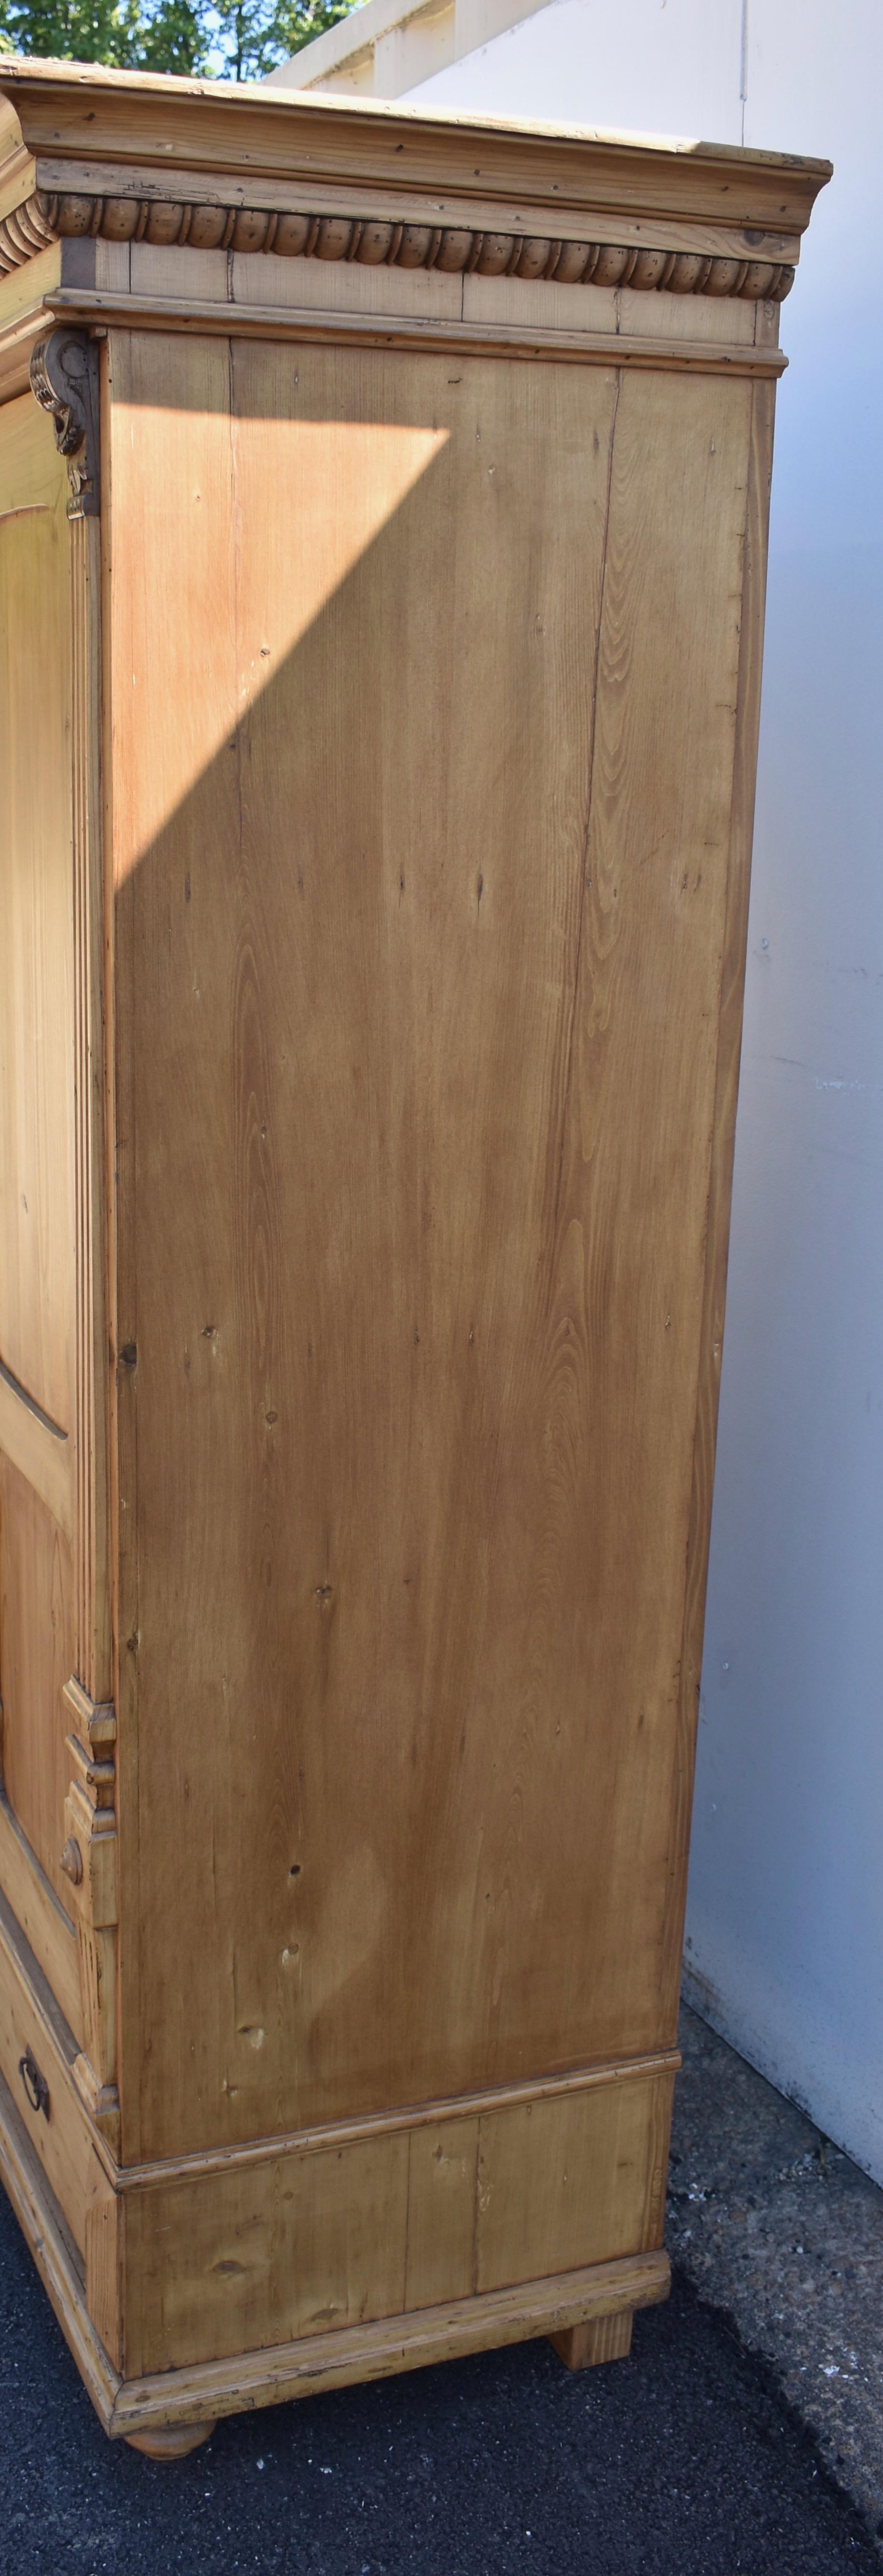 Polished Pine Two Door Armoire with Interior